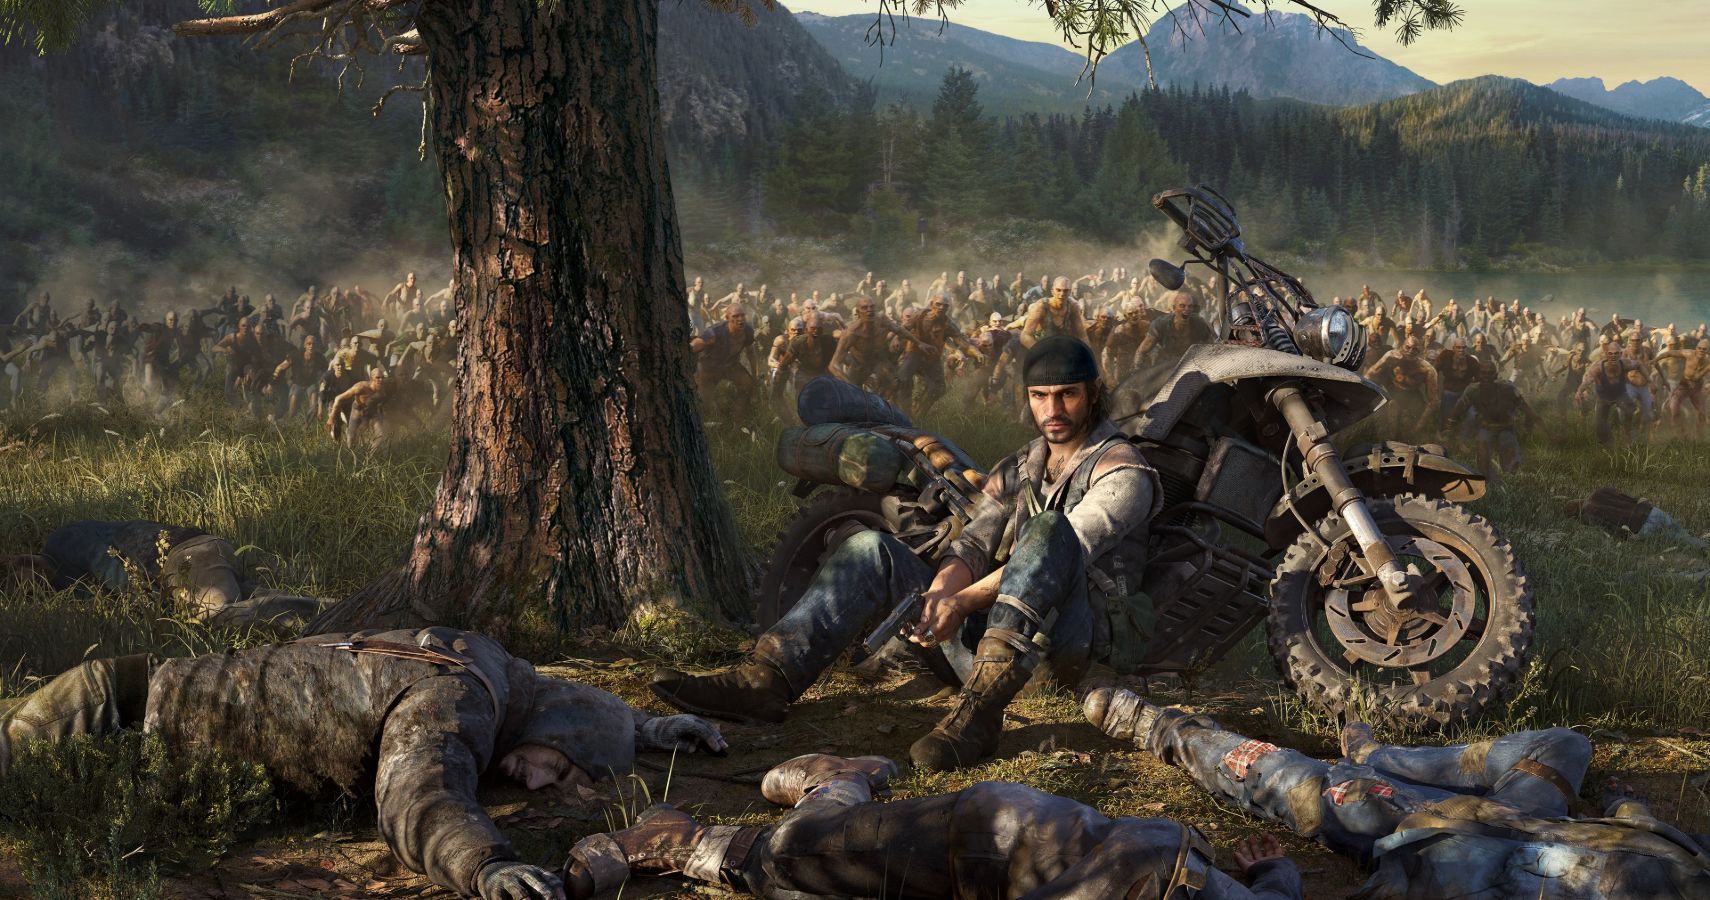 Days Gone on PS5 will feature up to 60fps in dynamic 4K